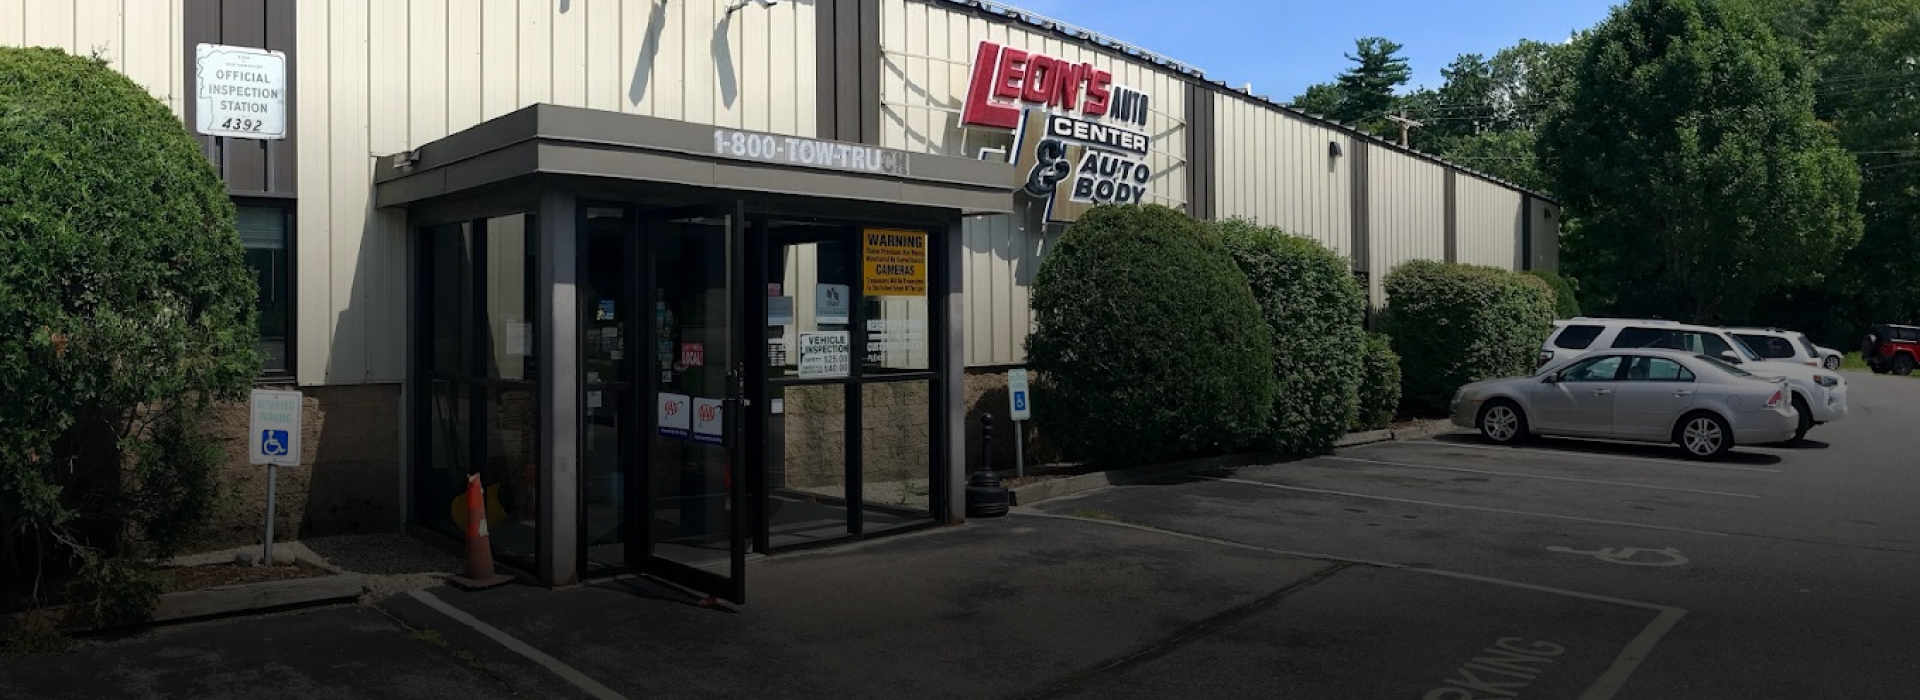 The front of our Keene Auto Repair Shop | Leon's Auto Center and J&L Auto Body